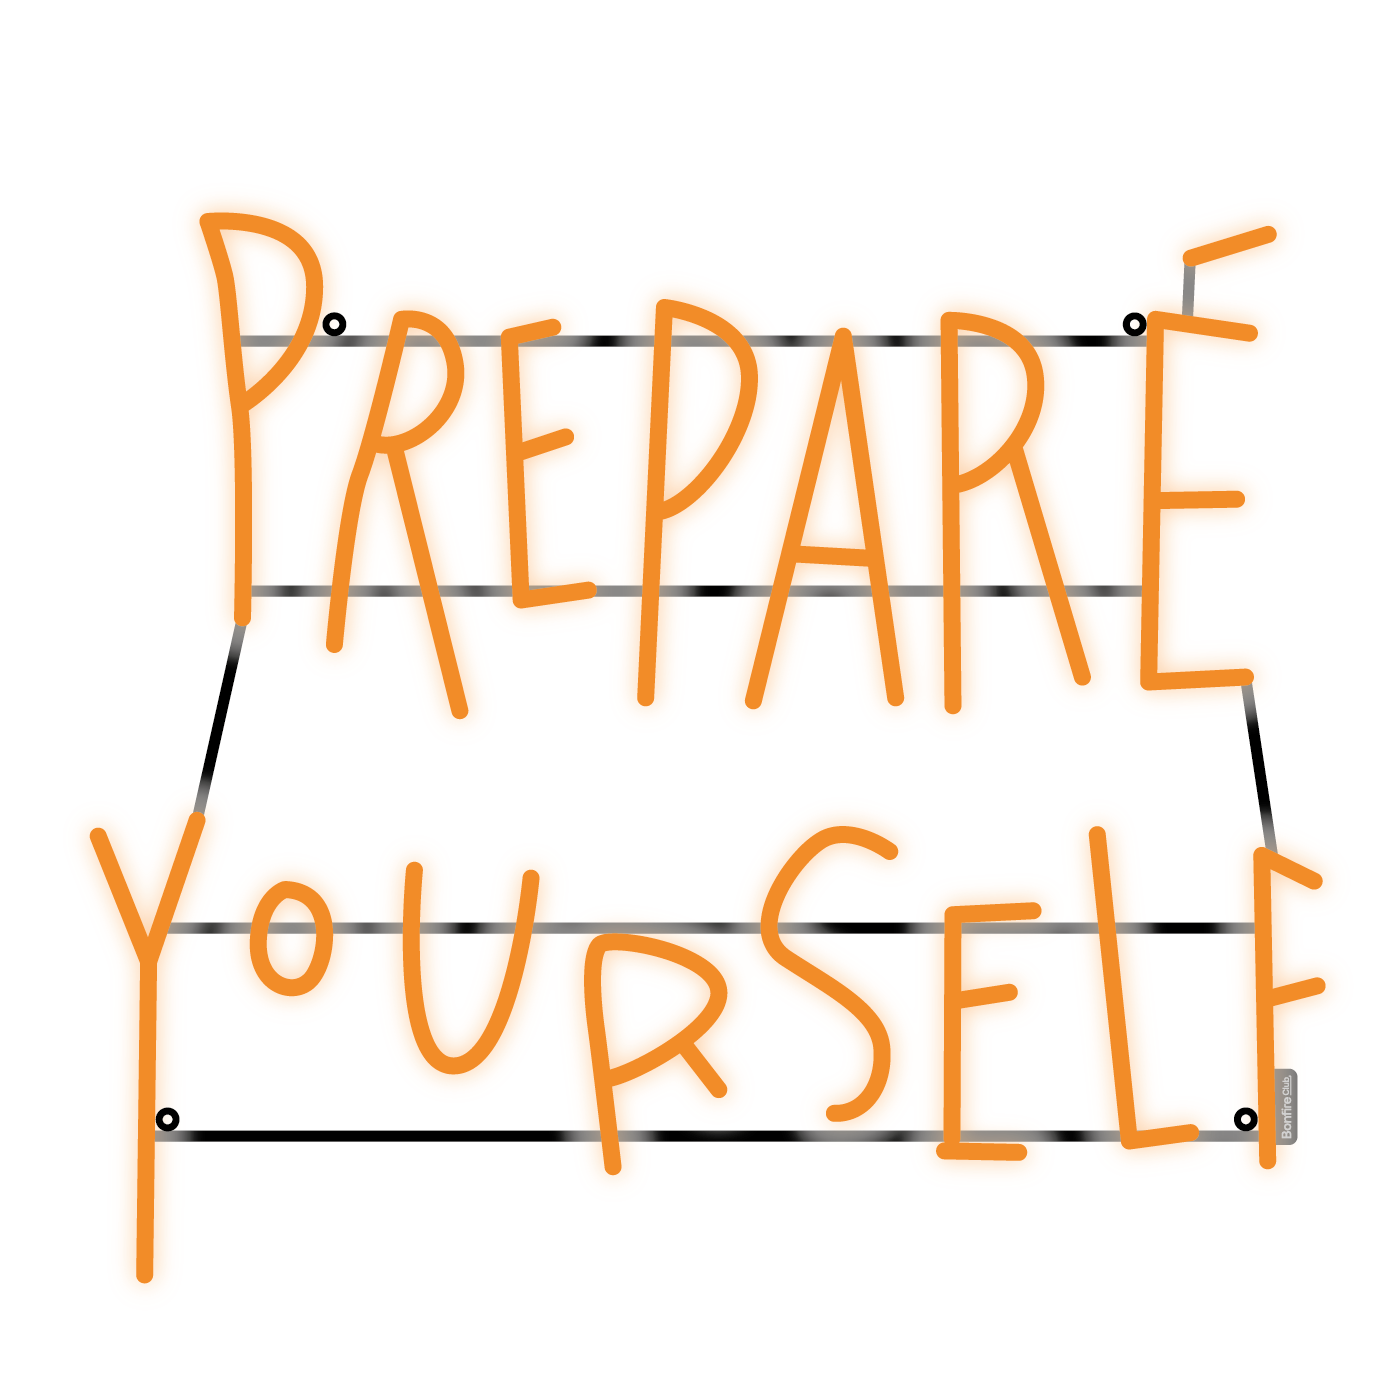 technical drawing of a LED Neon Art of a text saying "preparé yourself". The Artist is Kelly Hortens